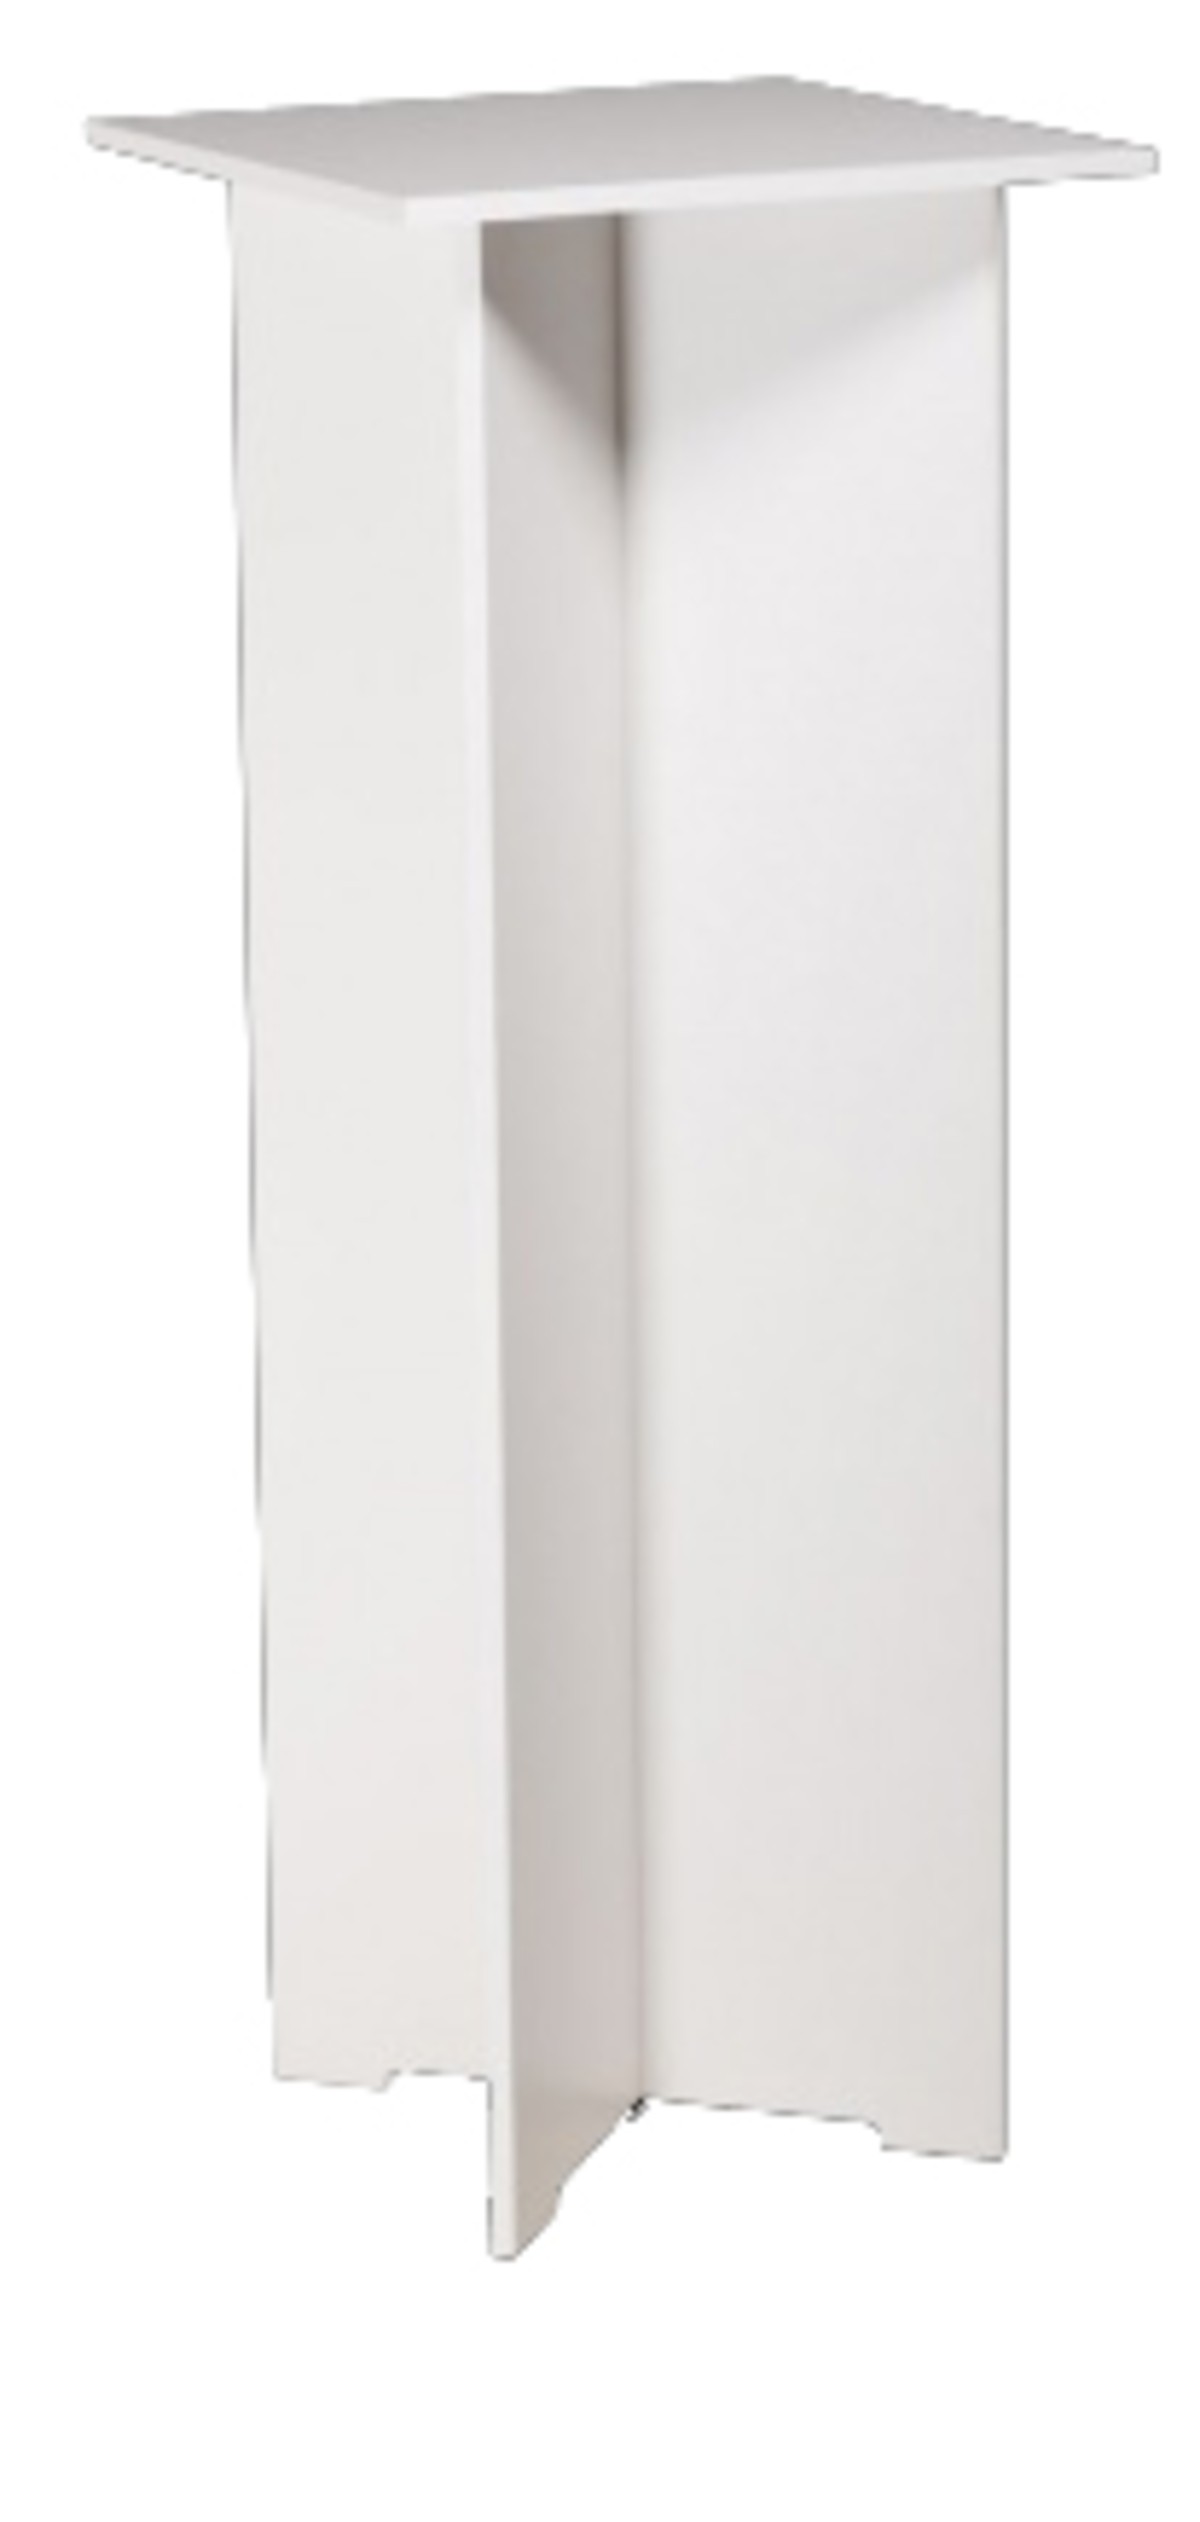 CLEARVISION LARGE PEDESTAL